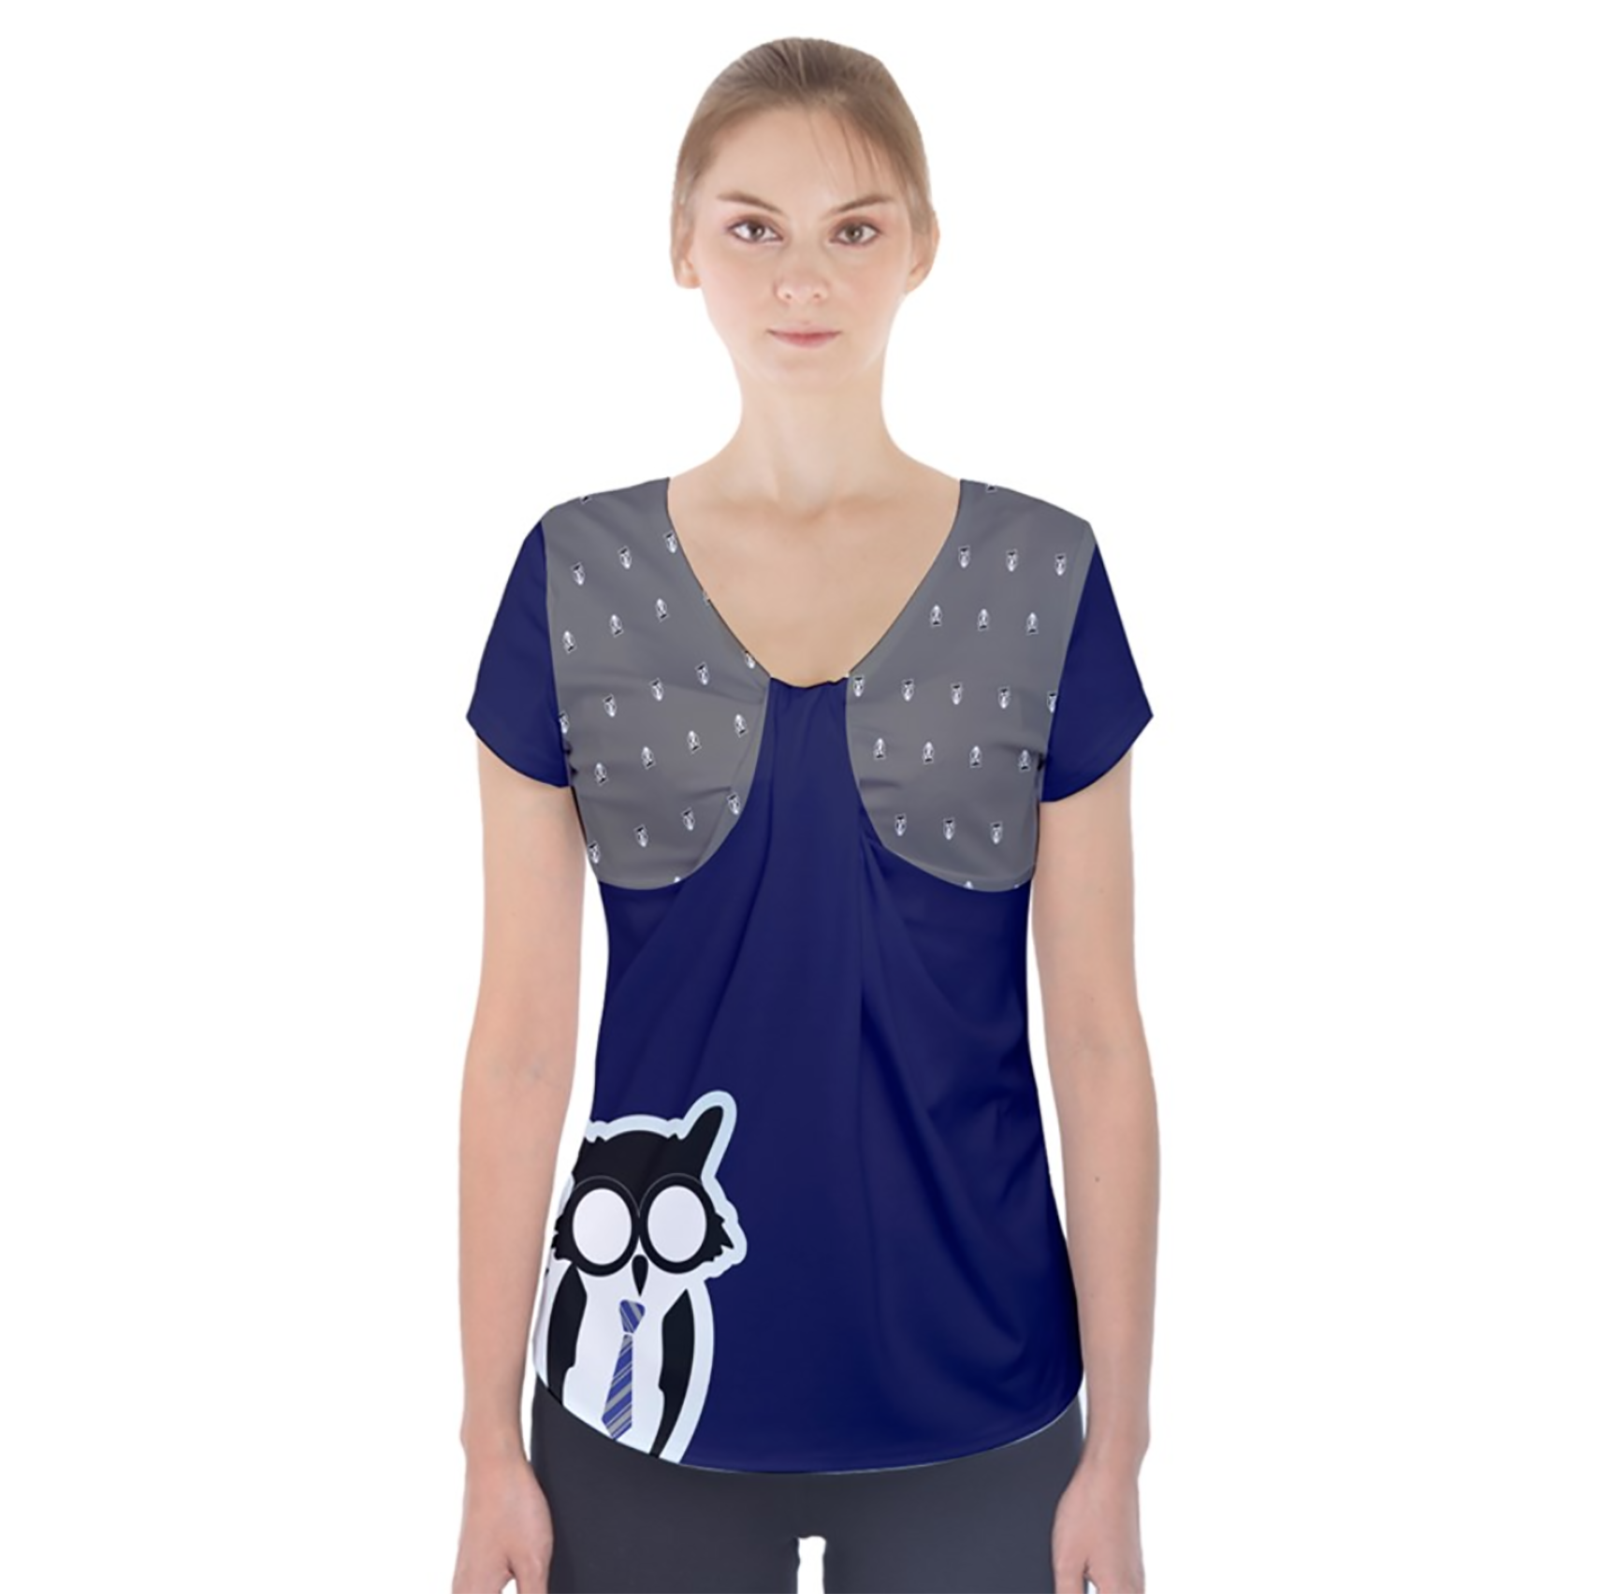 Blue/gray Owl Short Sleeve Front Detail Top - Inspired by Ravenclaw